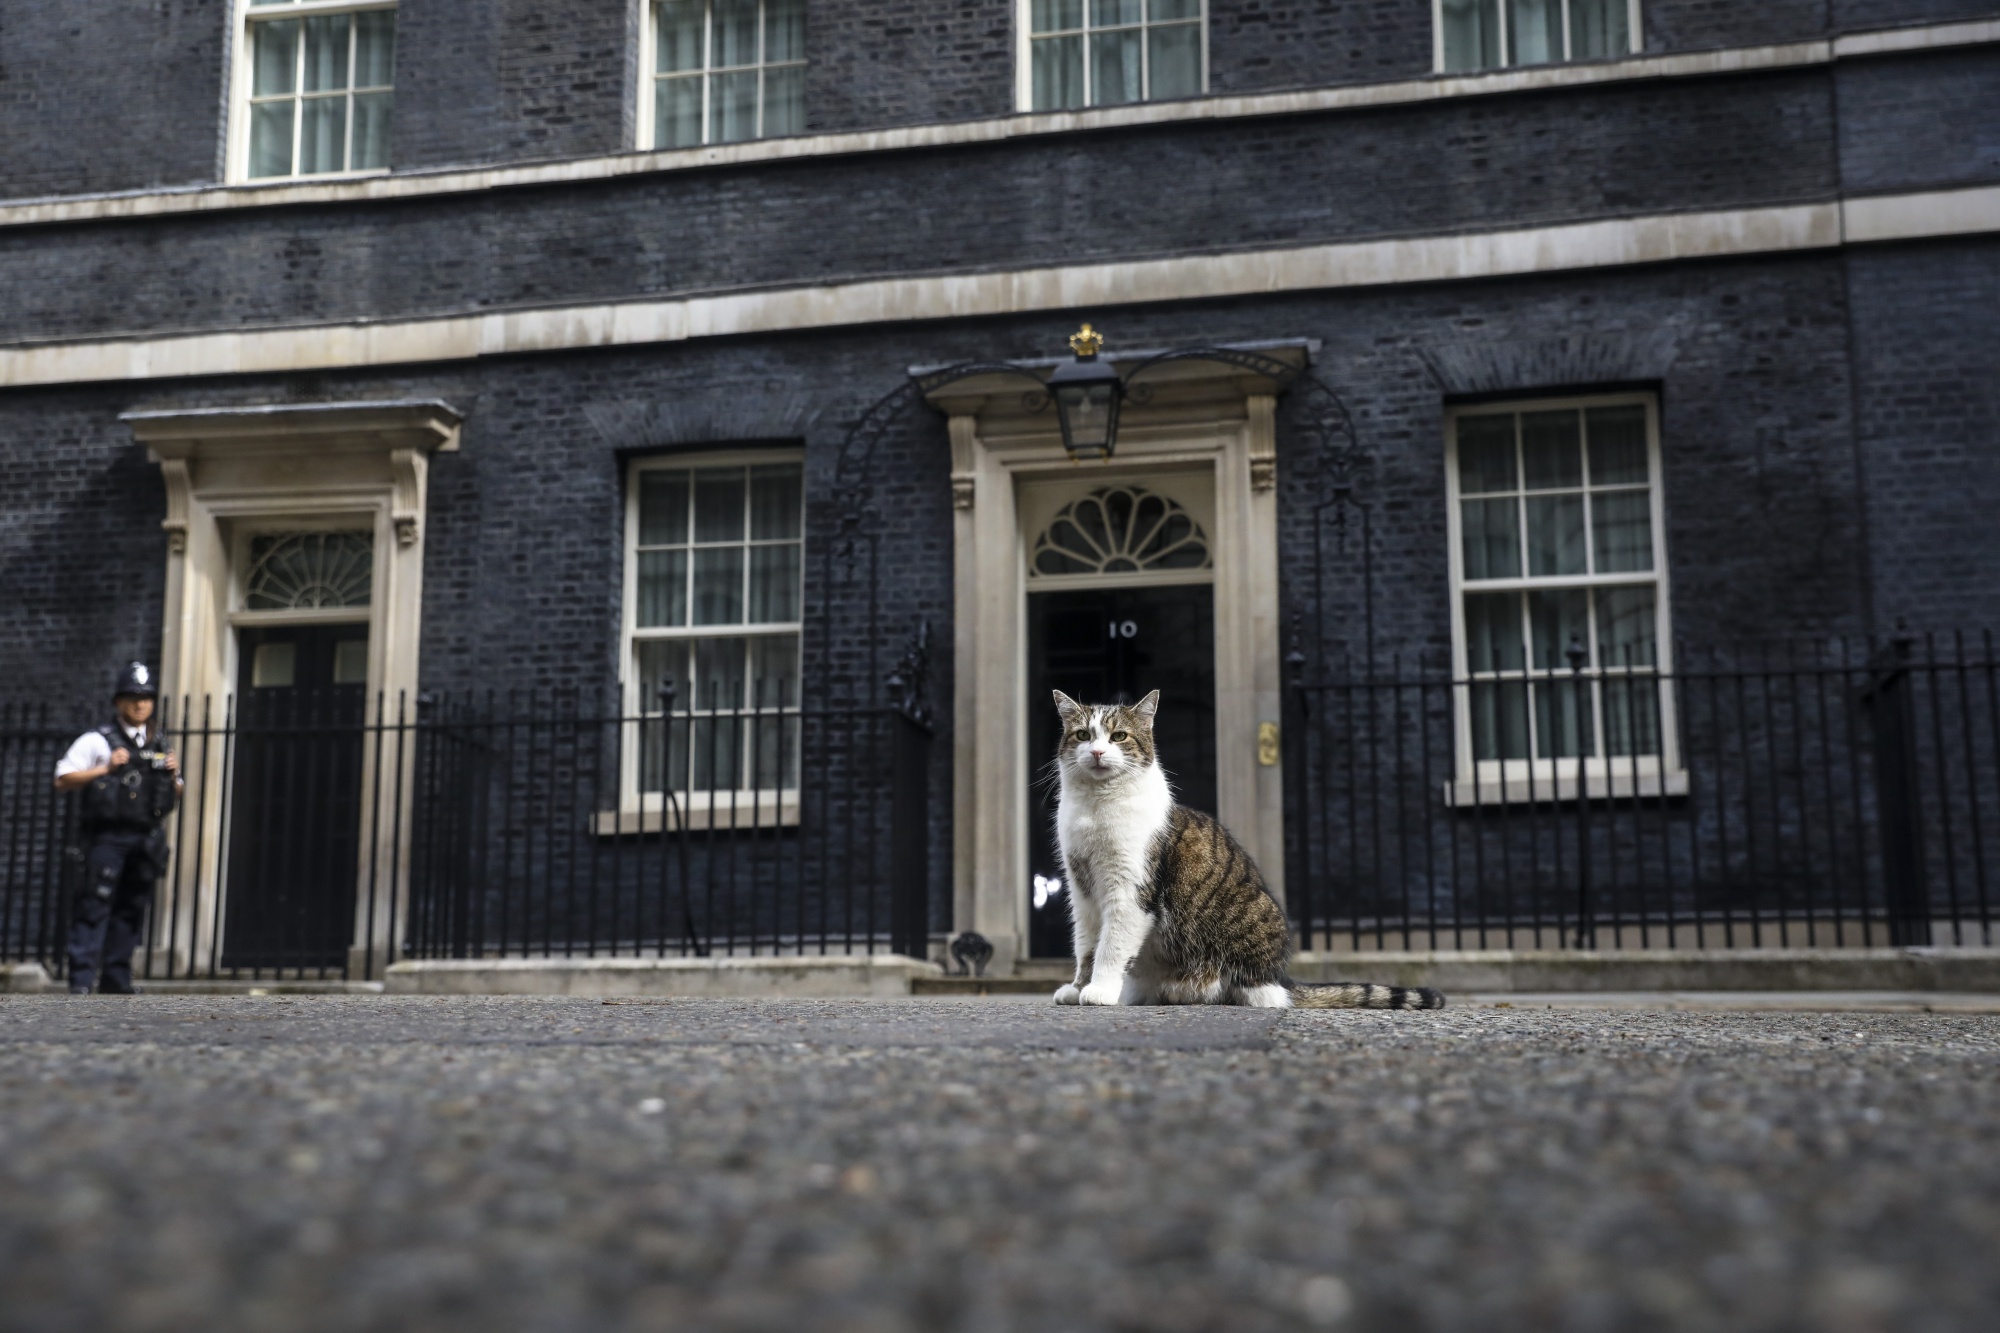 Larry, the Downing Street cat stands in the road outside at number 10 Downing Street in London, U.K.